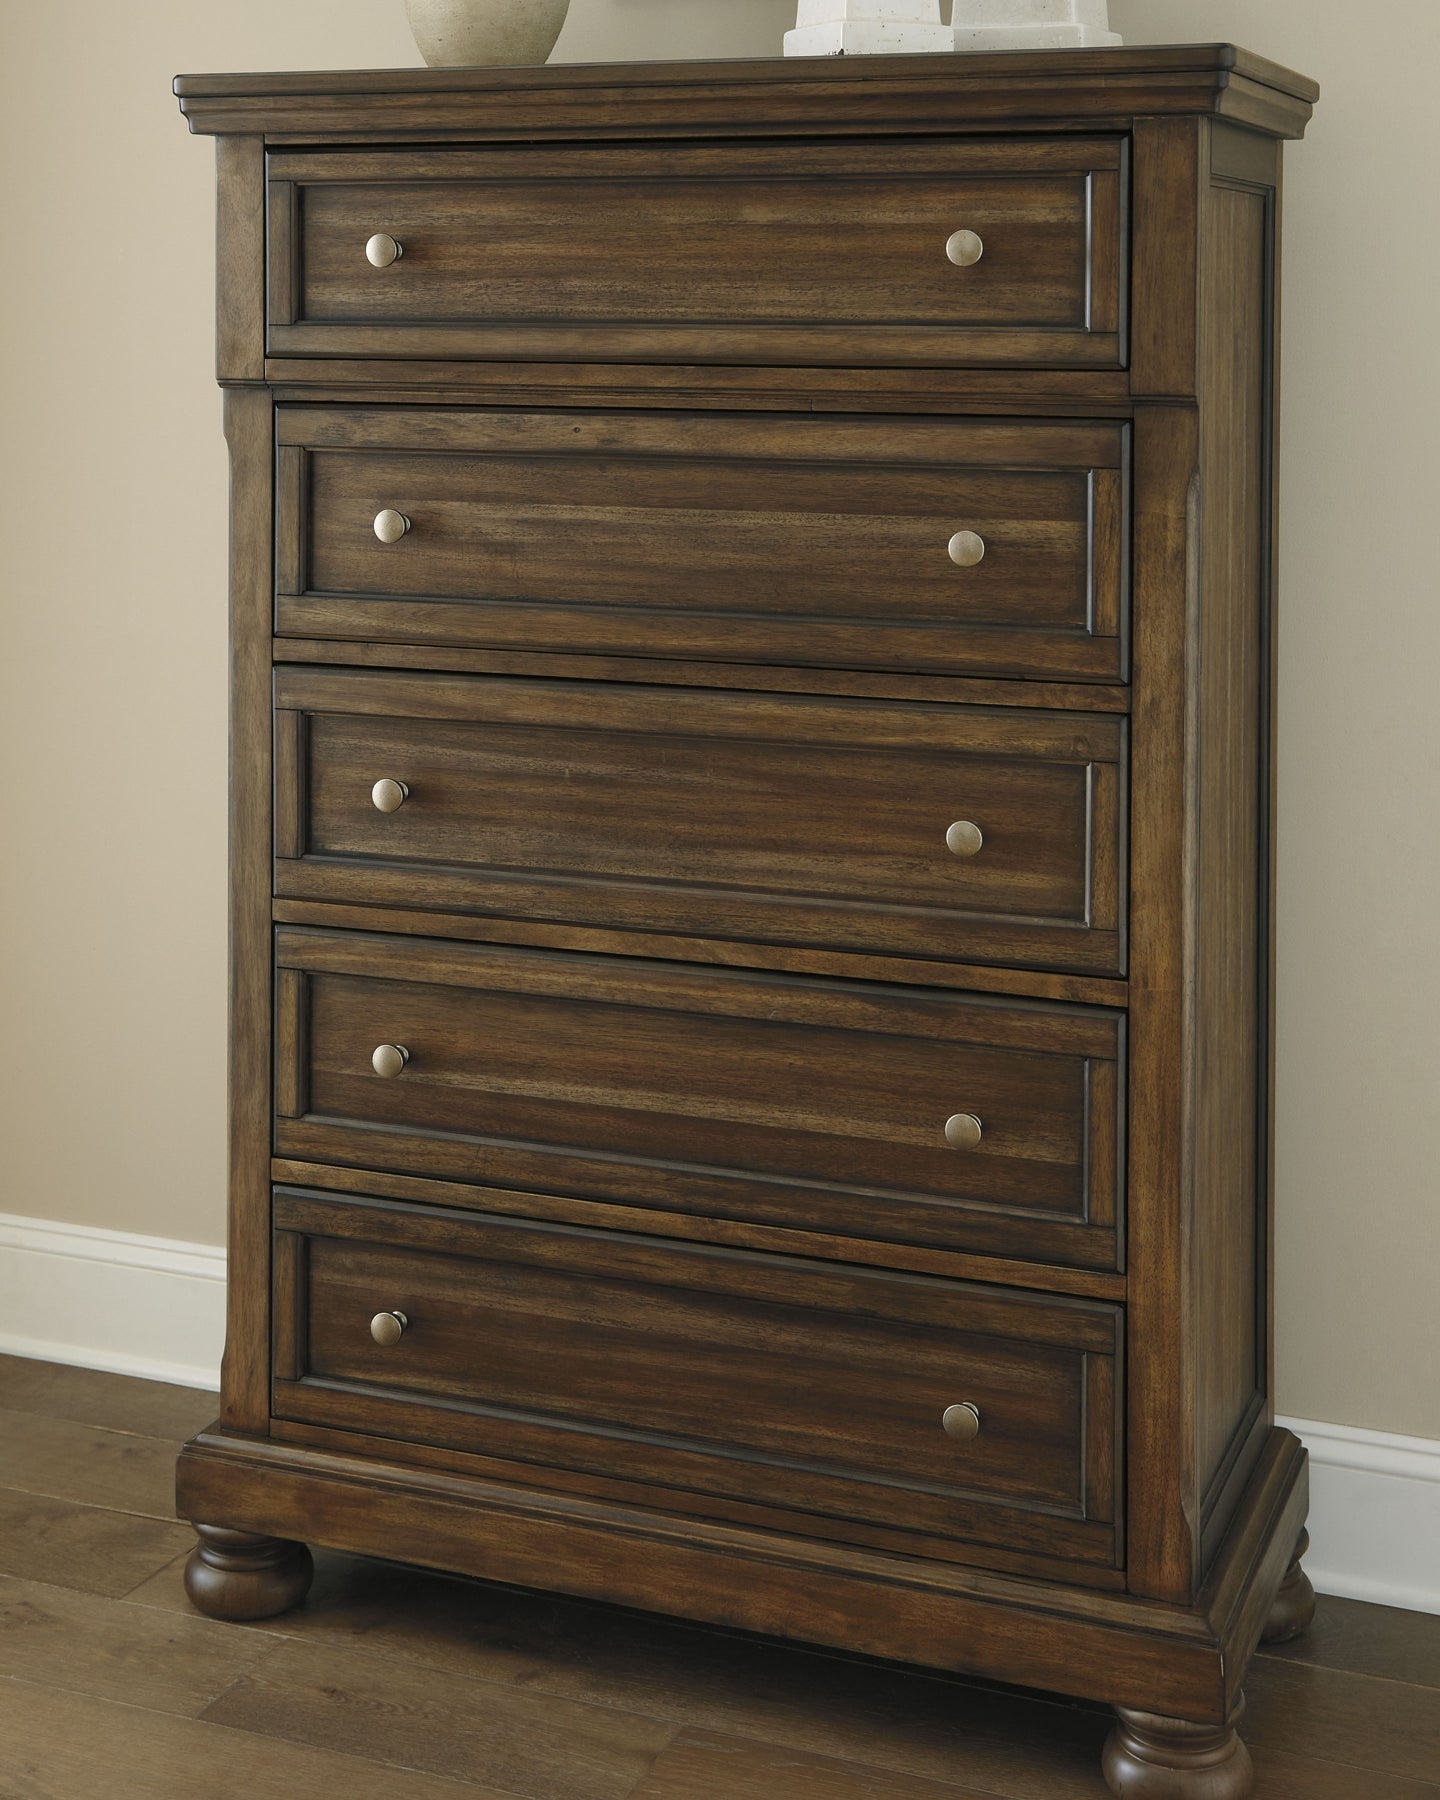 Robbinsdale Five Drawer Chest Signature Design by Ashley®